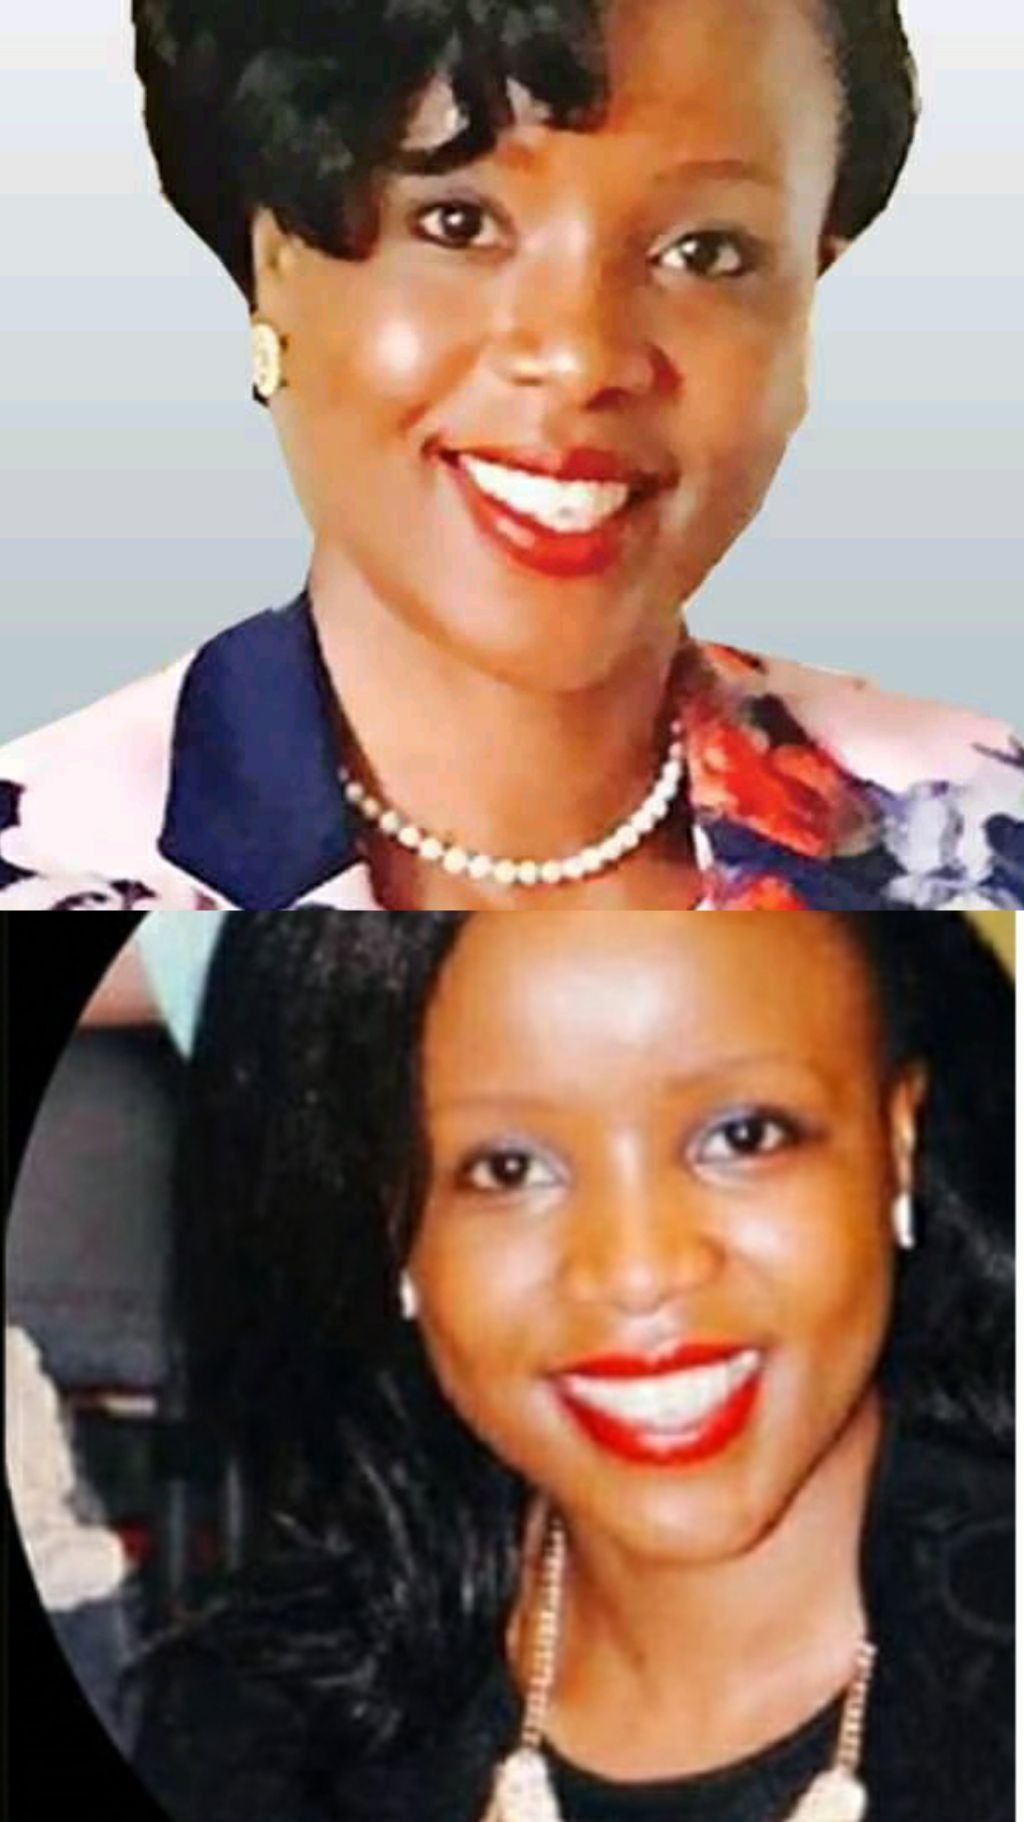 Photo of Dorothy Namutebi Ssozi, the woman believed to be having an affair with Ivan